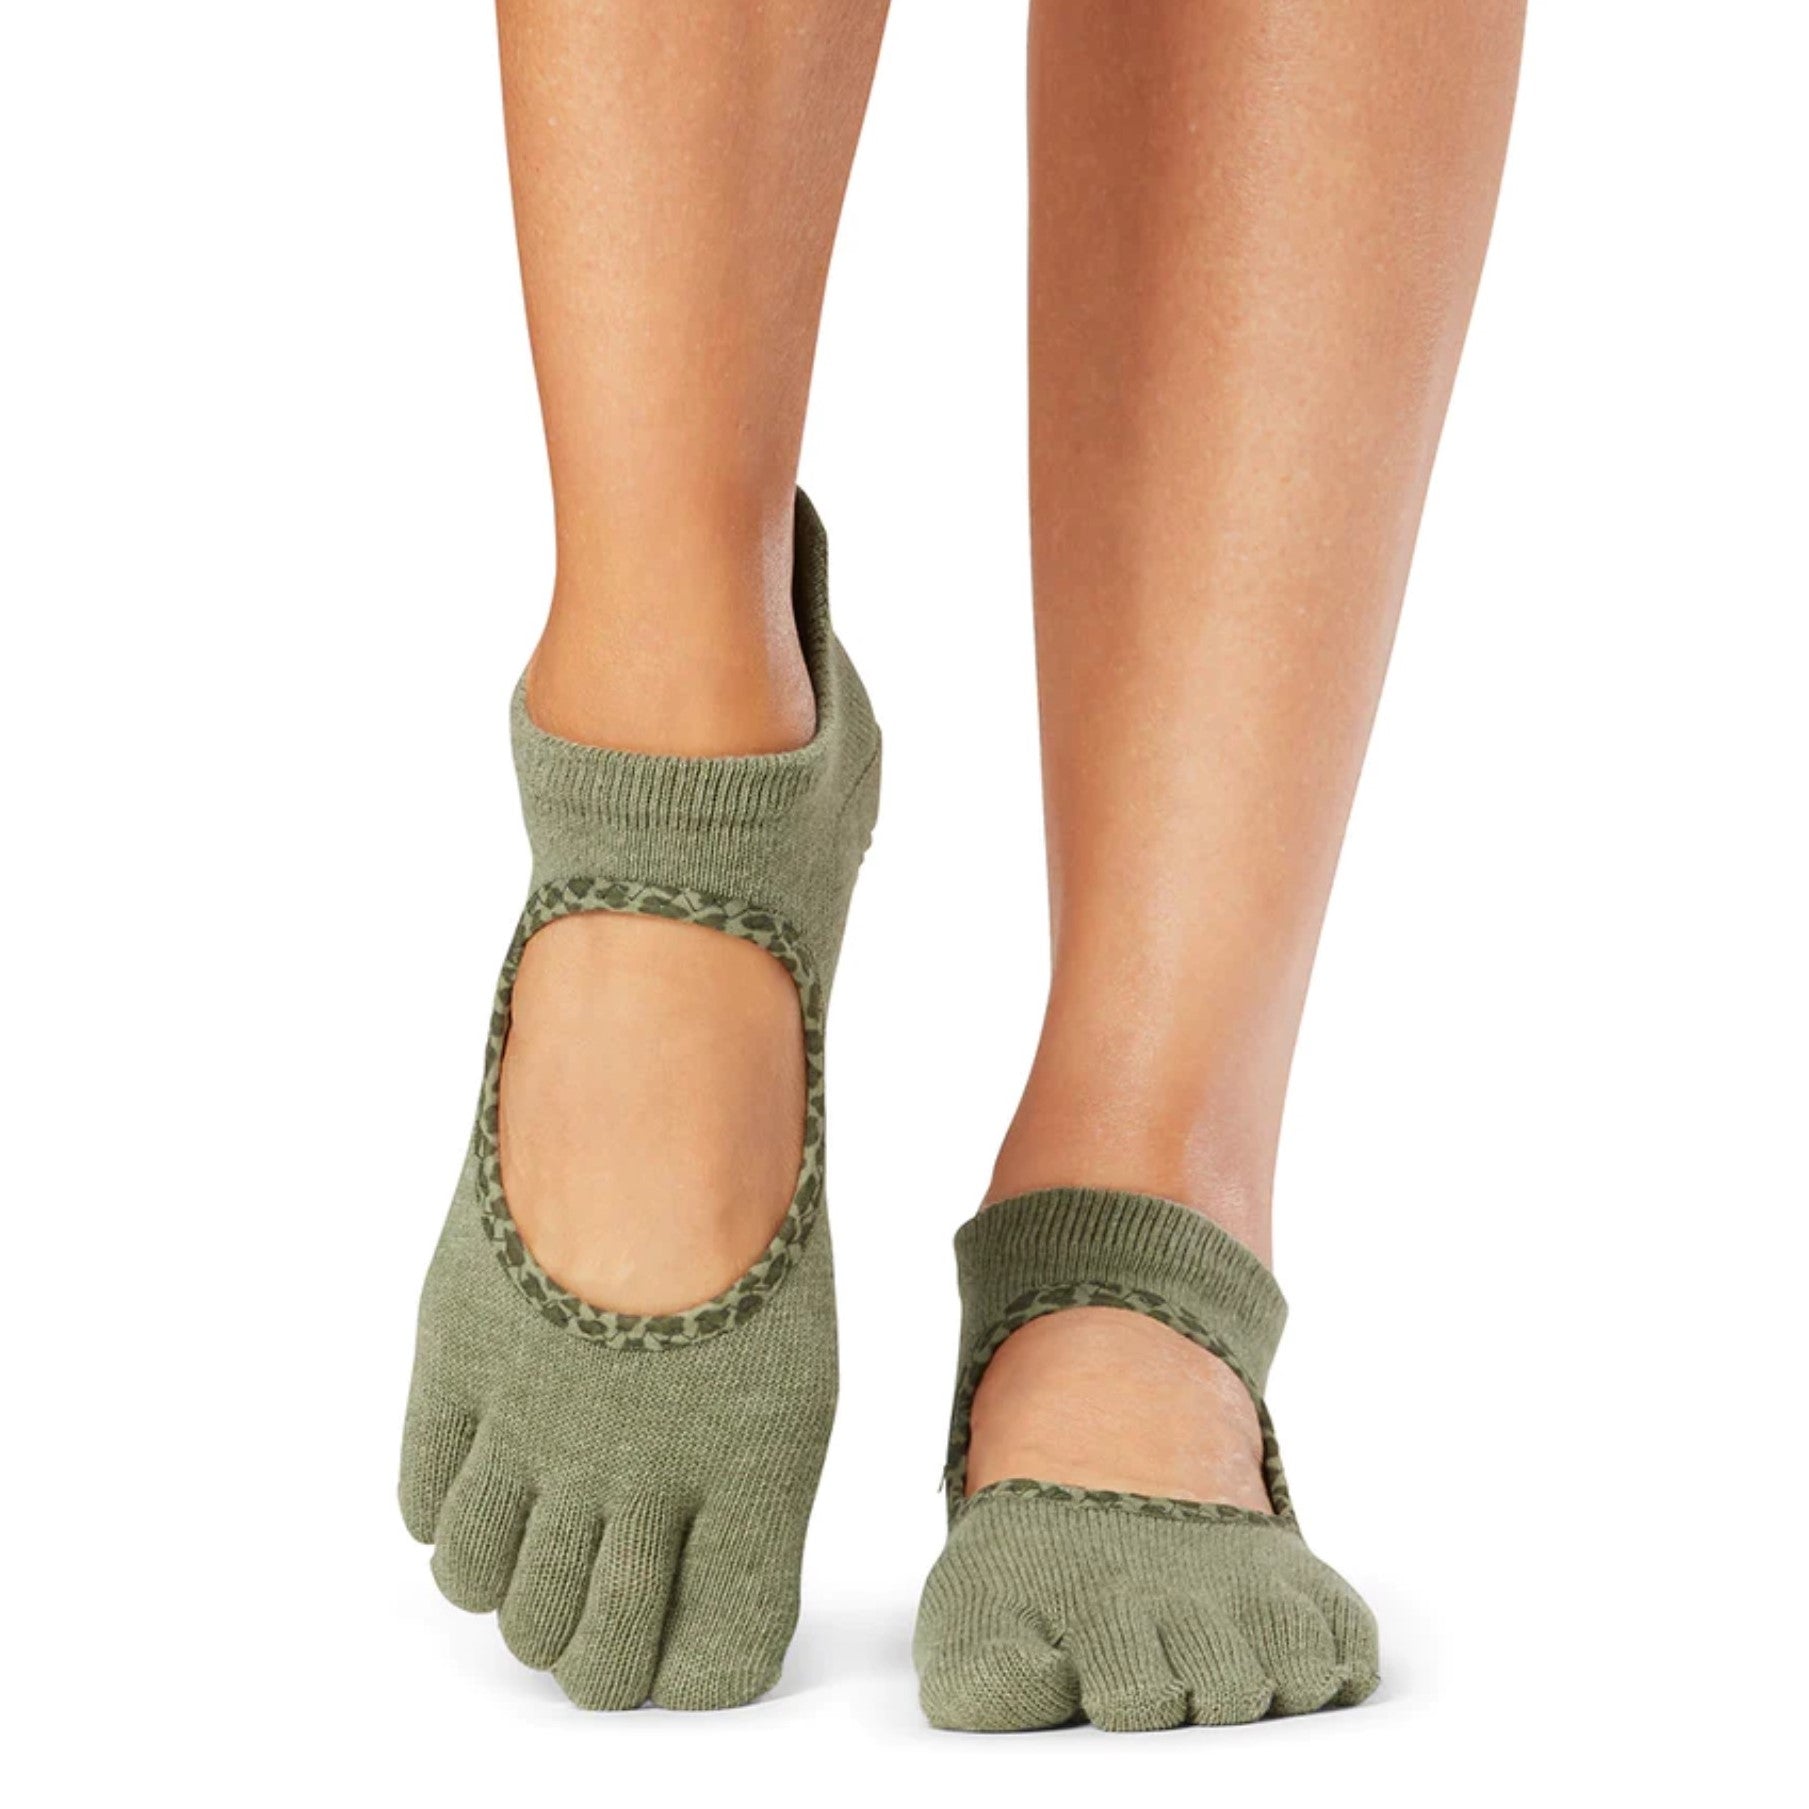 Shop Bellarina Full Toe in Olive Leopard - ToeSox - SimplyWorkout